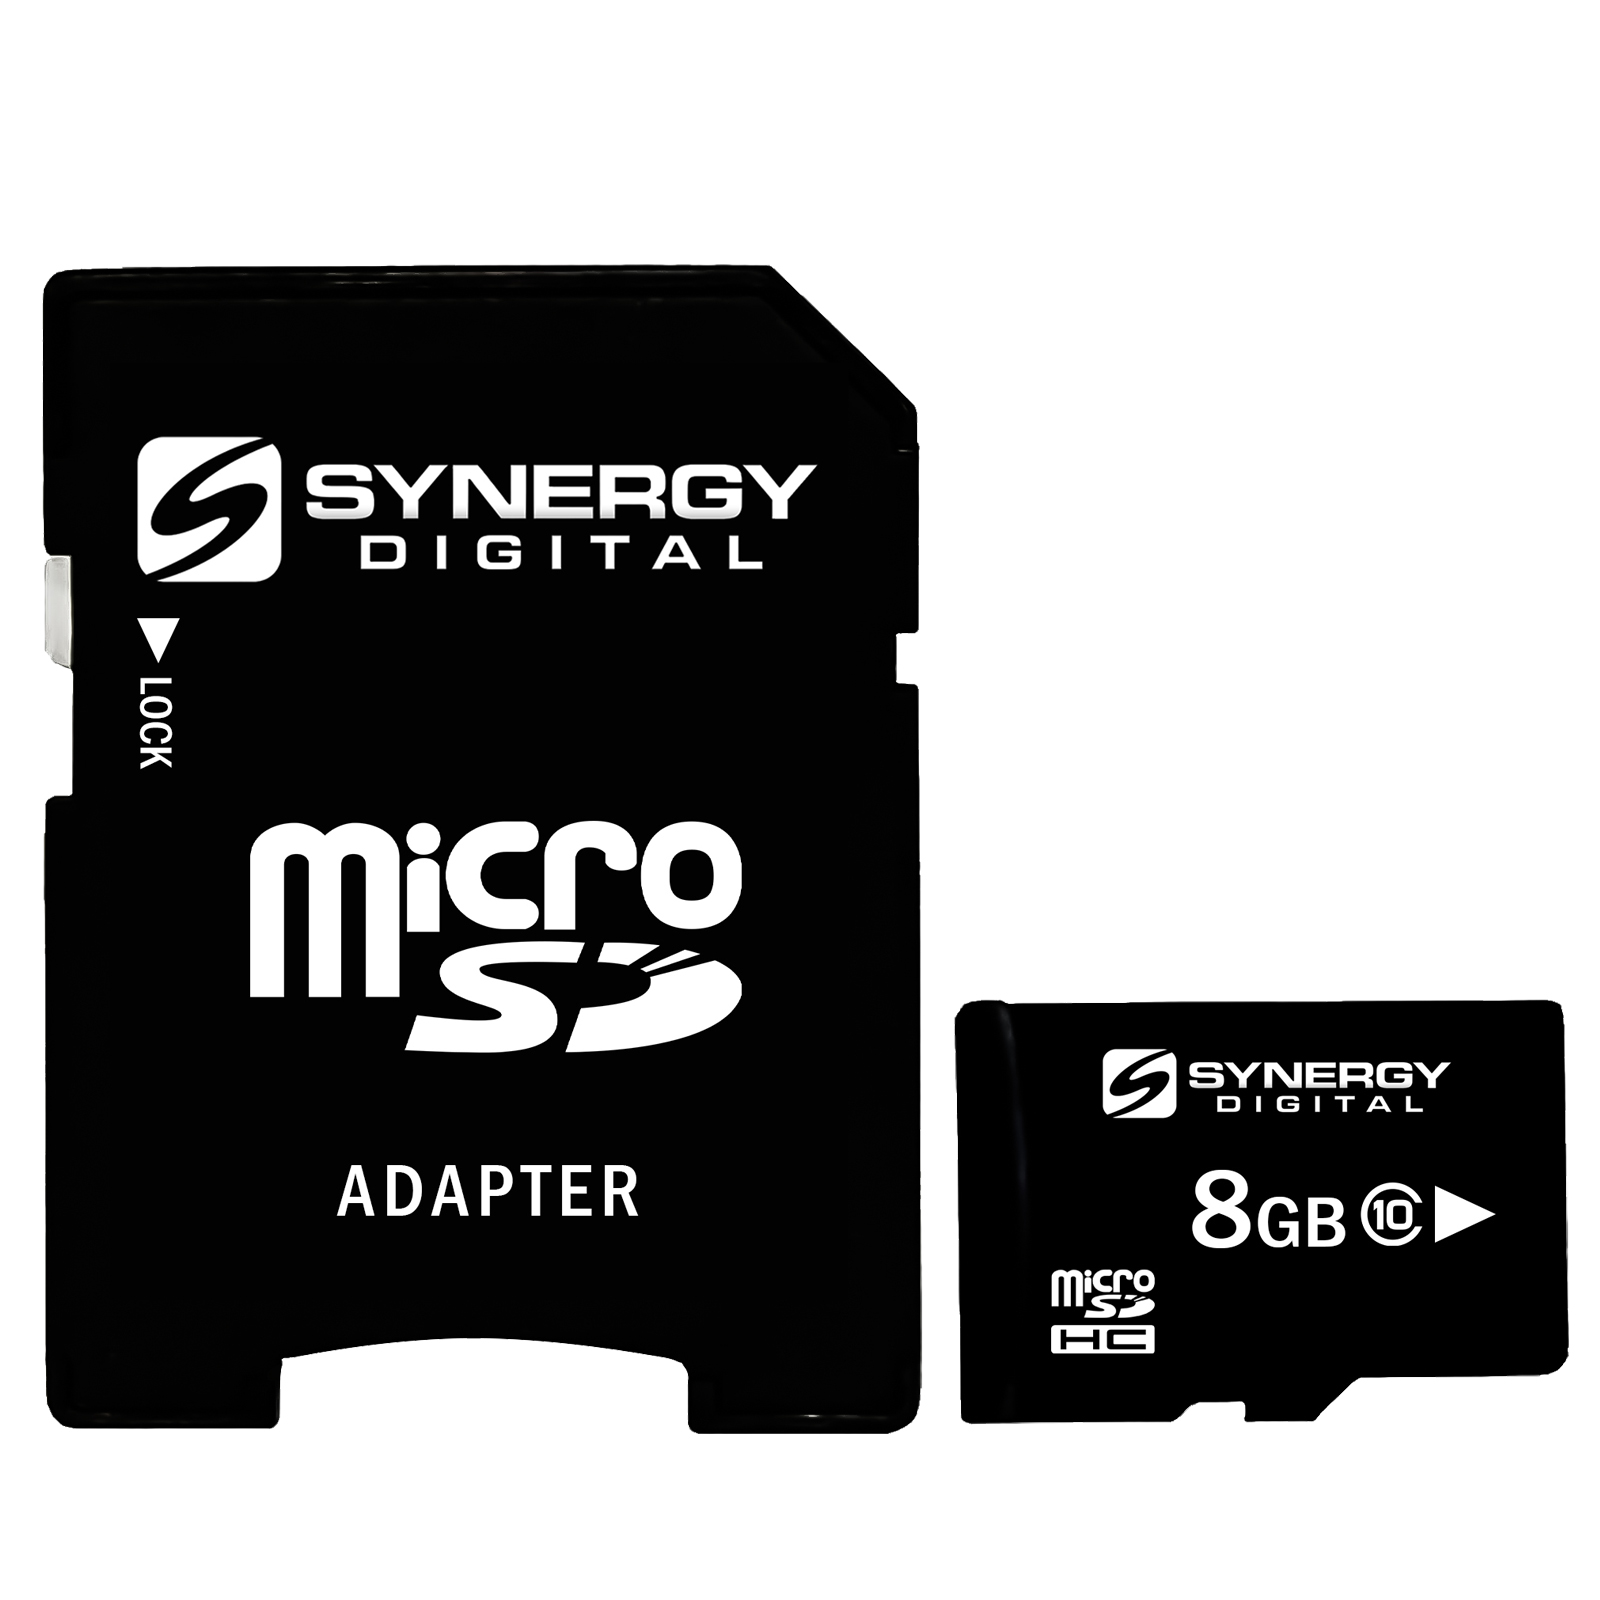 Memory Cards for NokiaCell Phone